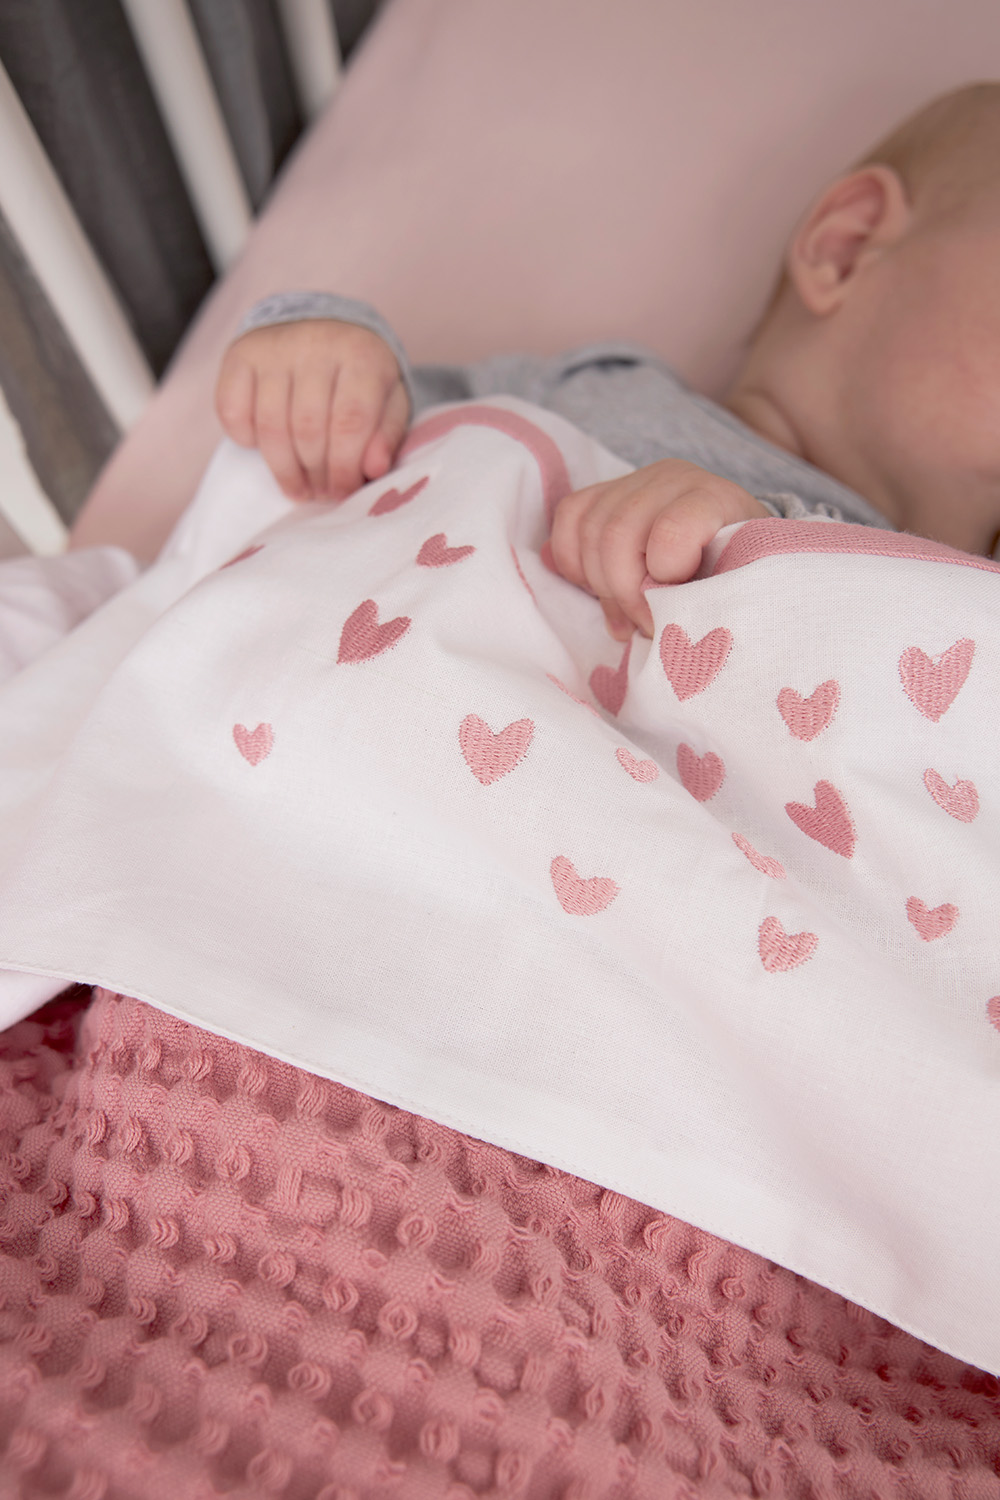 Cot bed sheet Hearts - old pink - 100x150cm